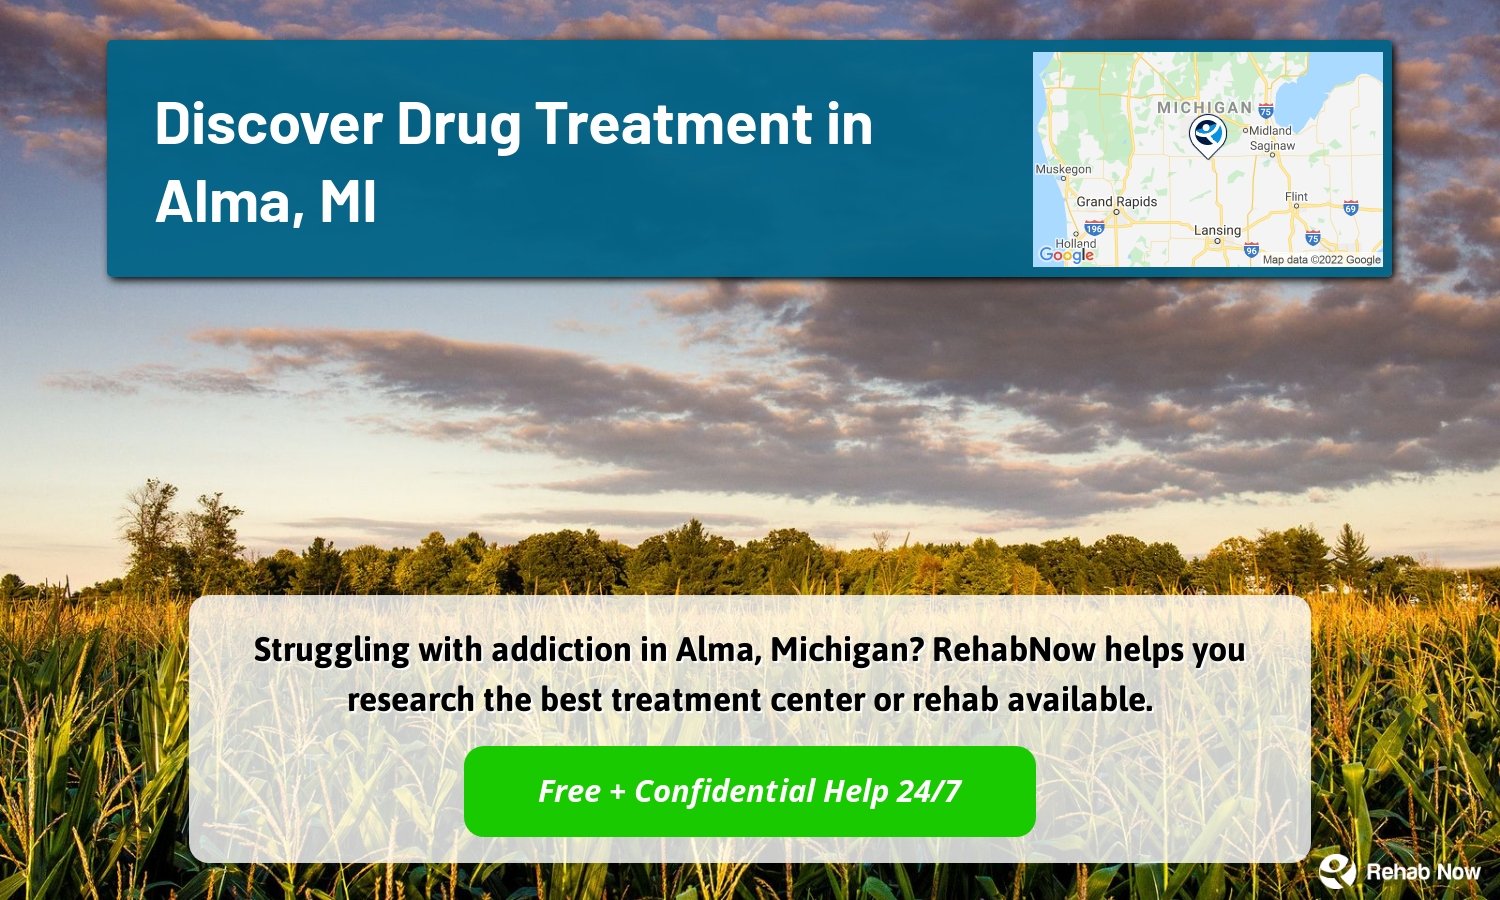 Struggling with addiction in Alma, Michigan? RehabNow helps you research the best treatment center or rehab available.